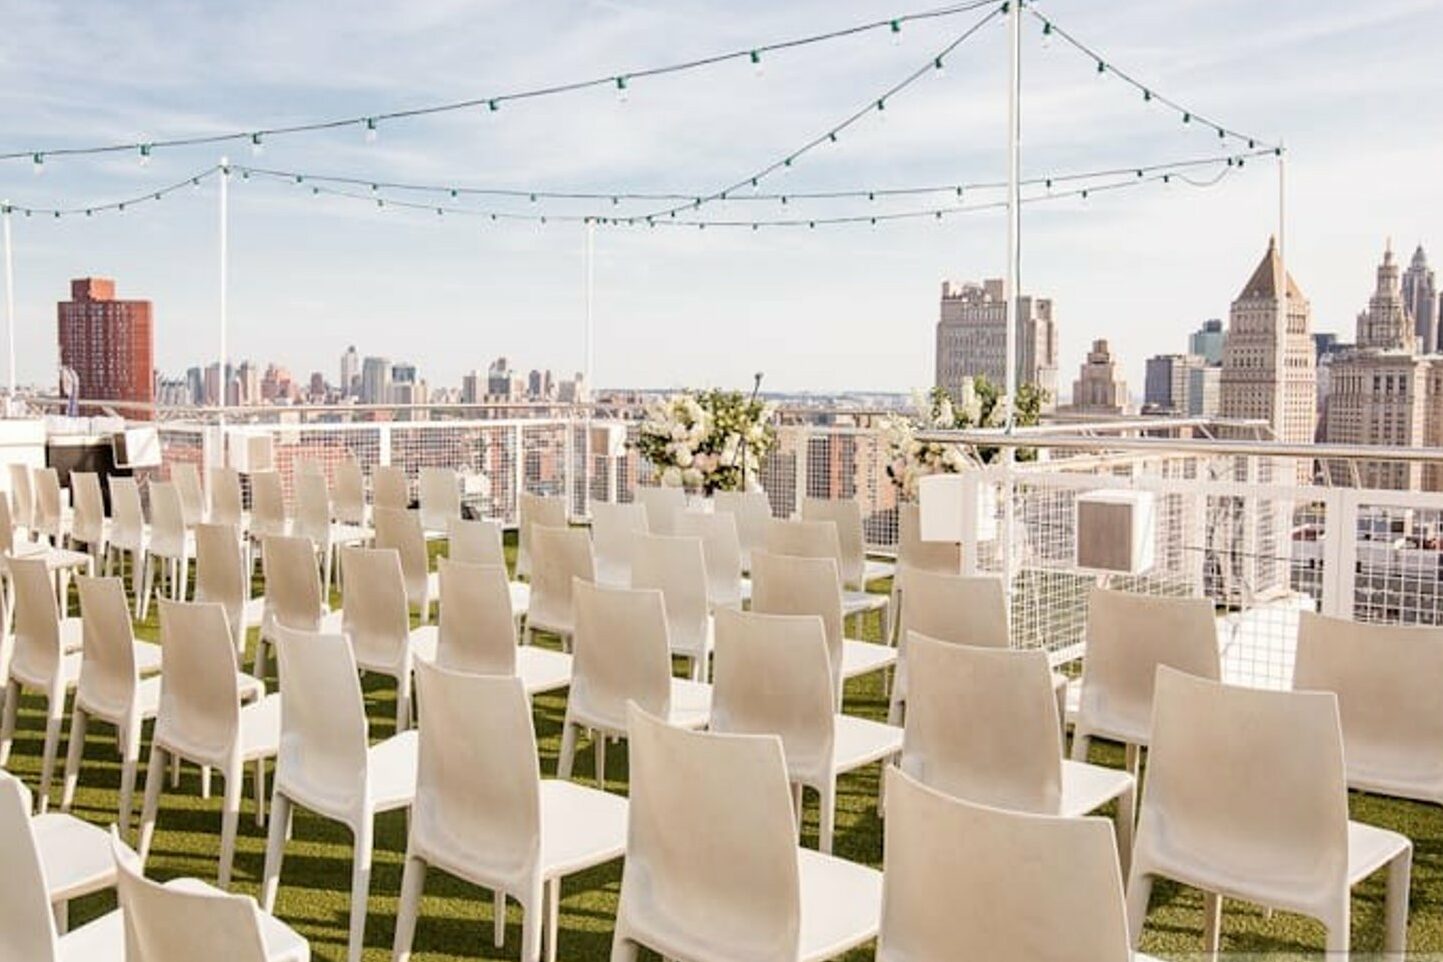 Nomo Soho rooftop with white chairs arranged and city view